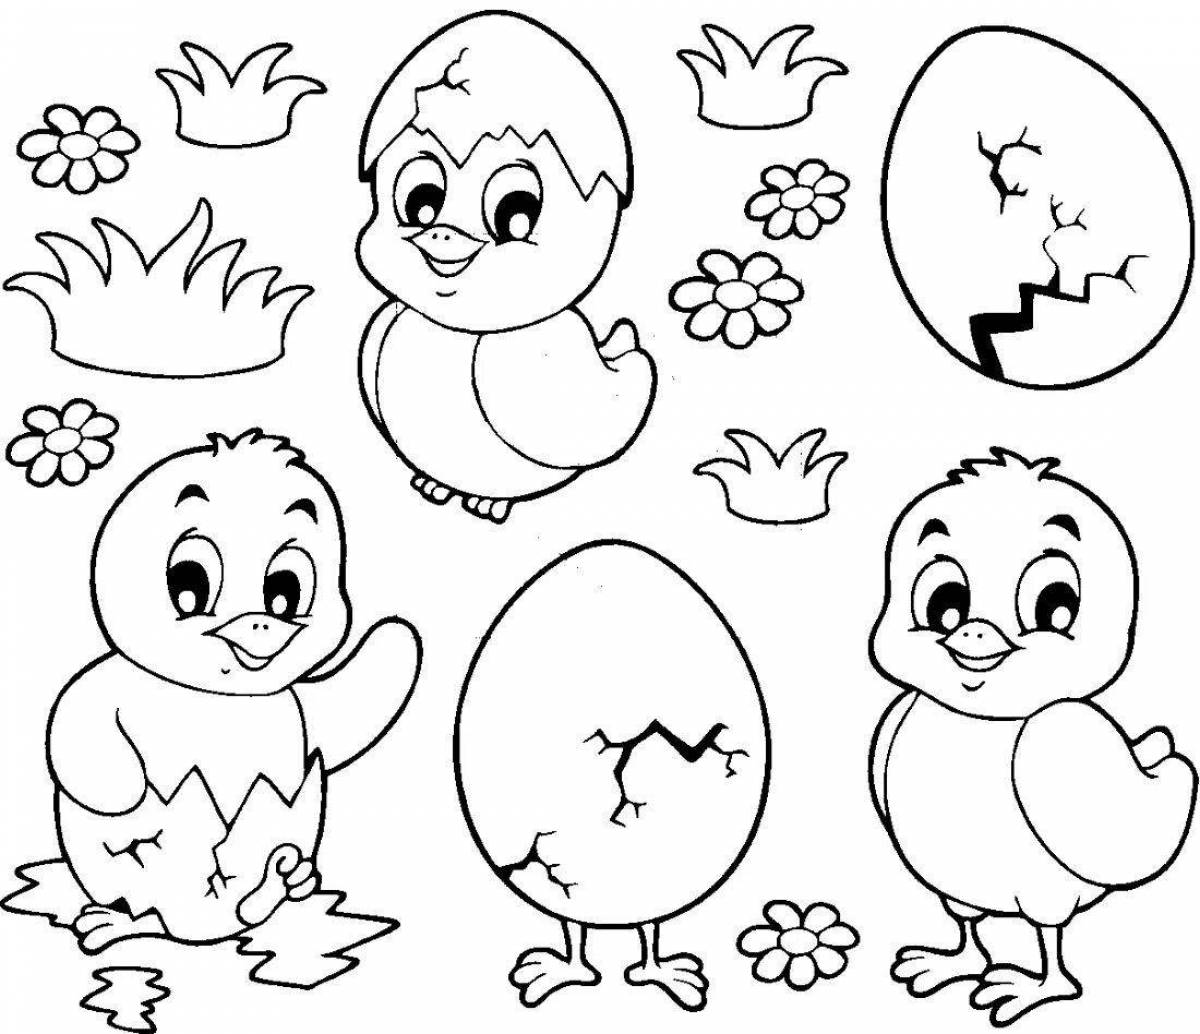 Coloring page delicious chick in egg